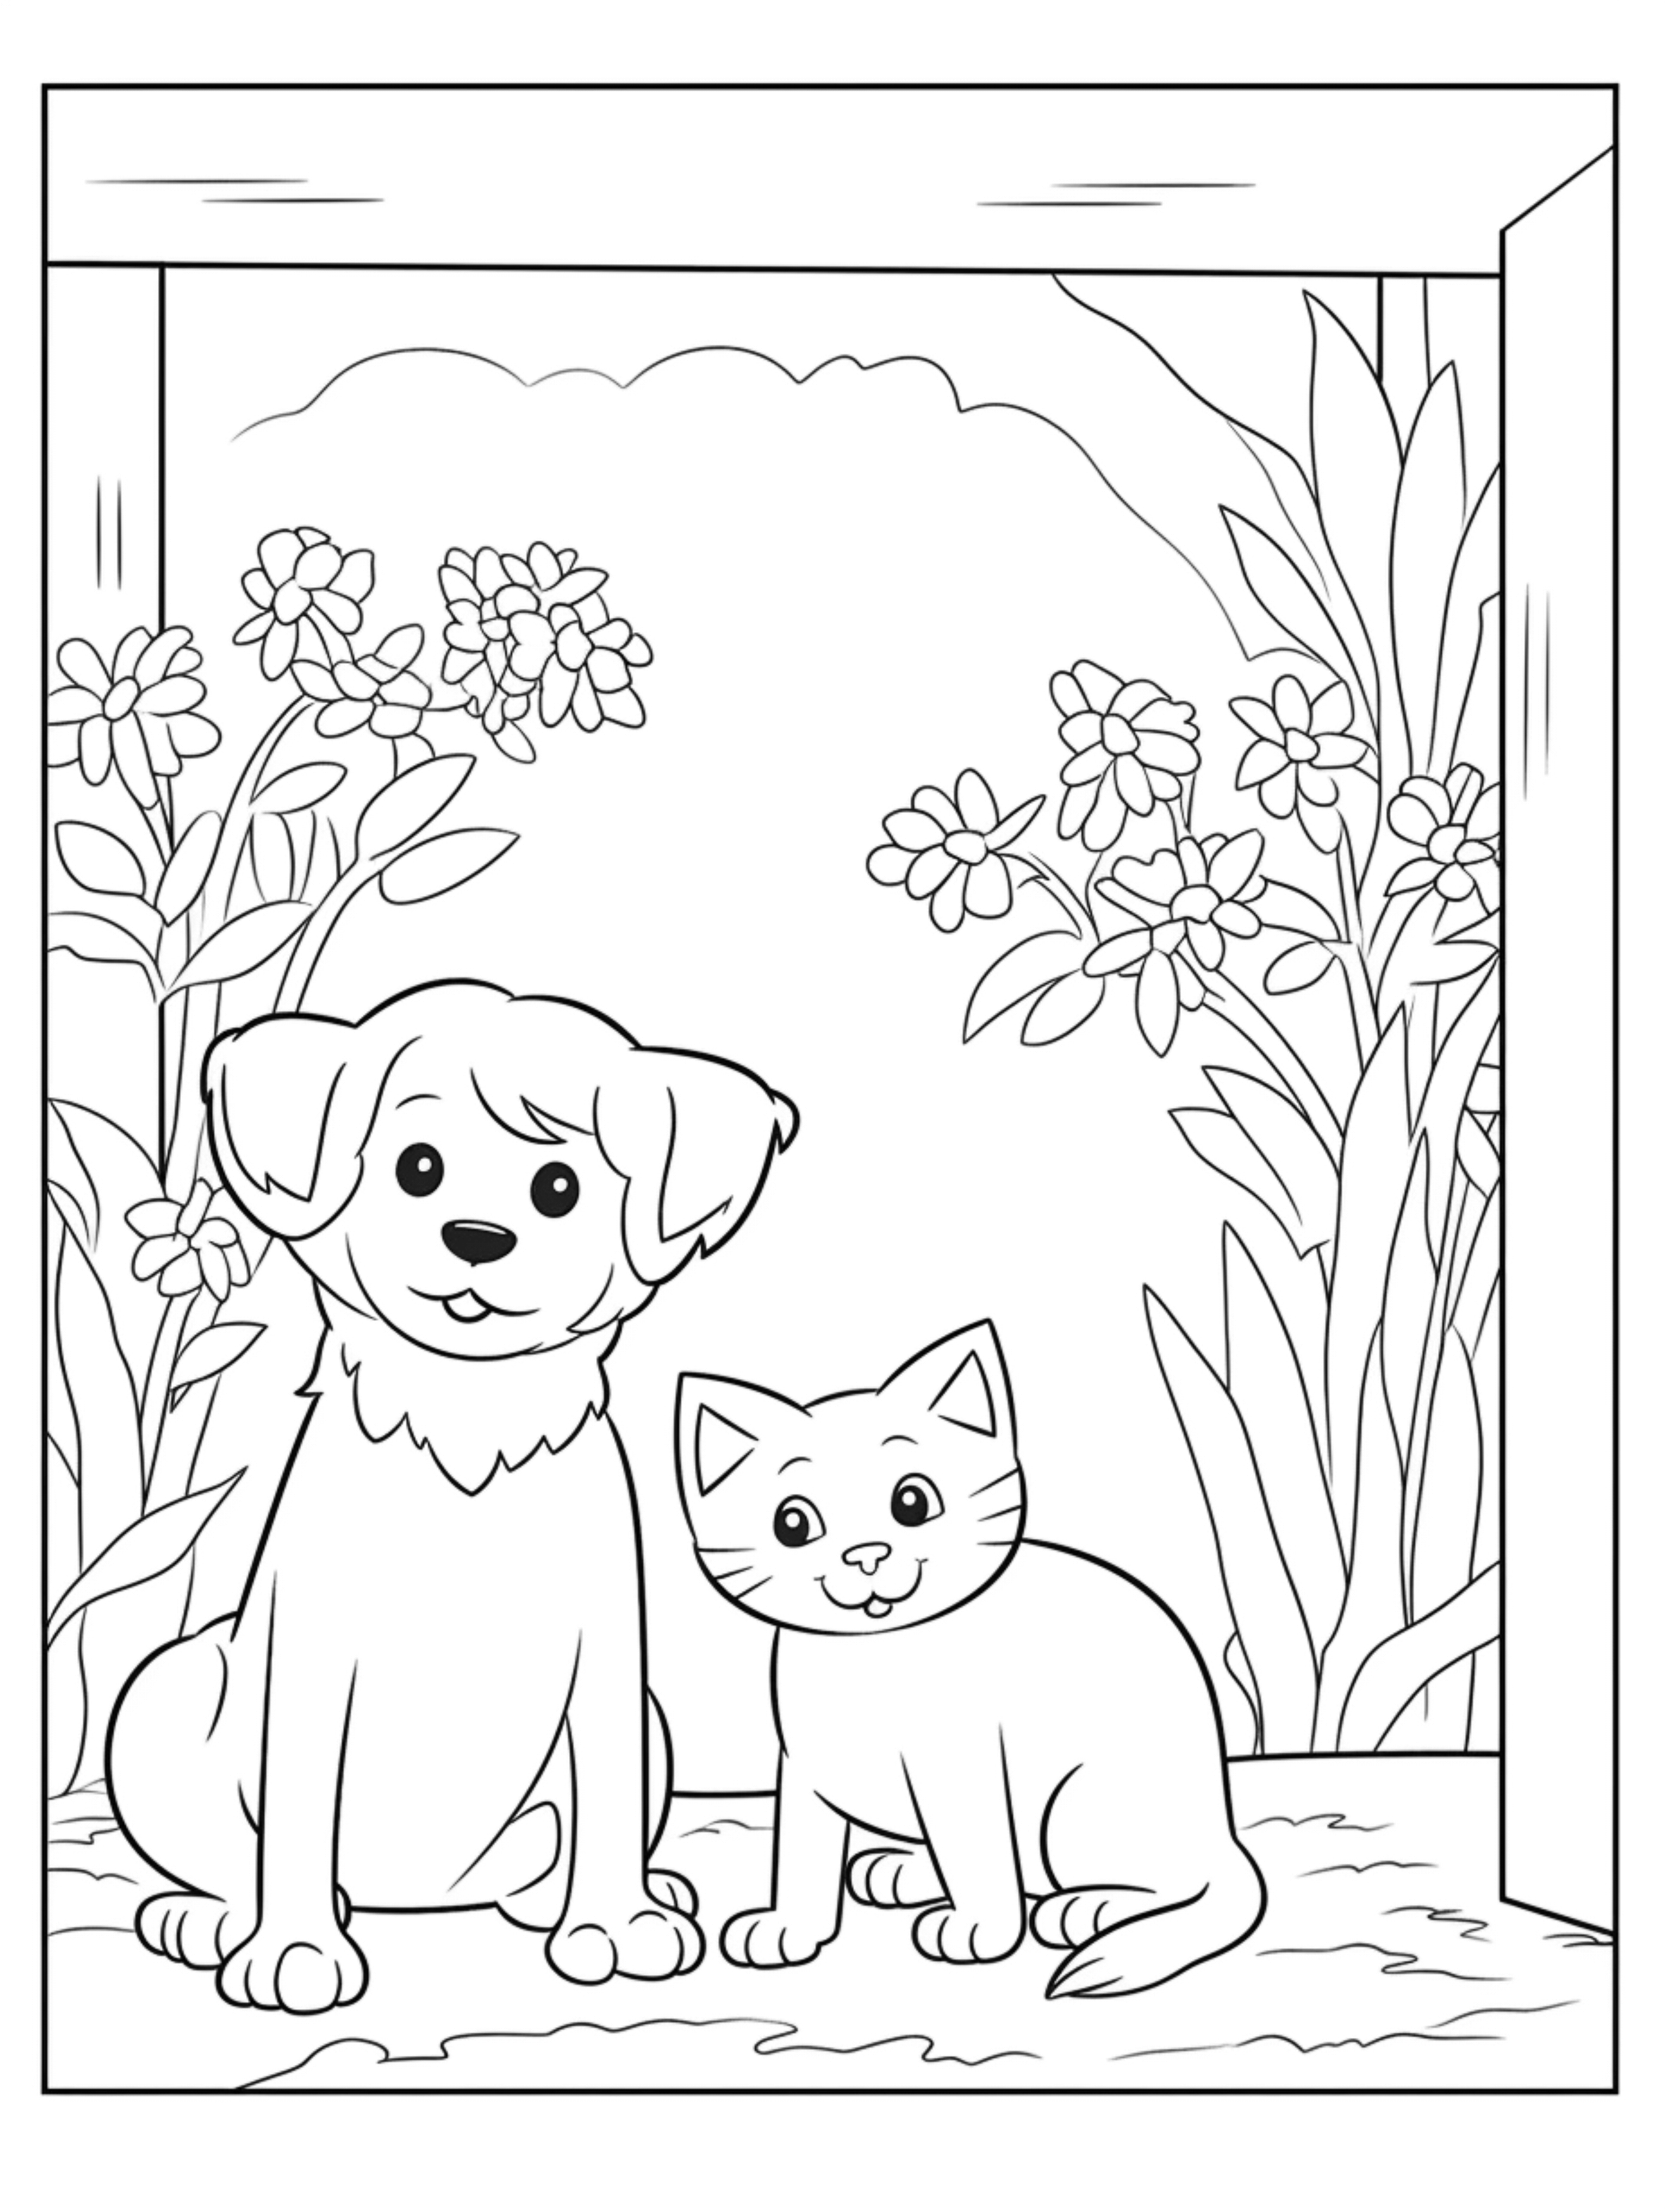 dog and cat coloring pages